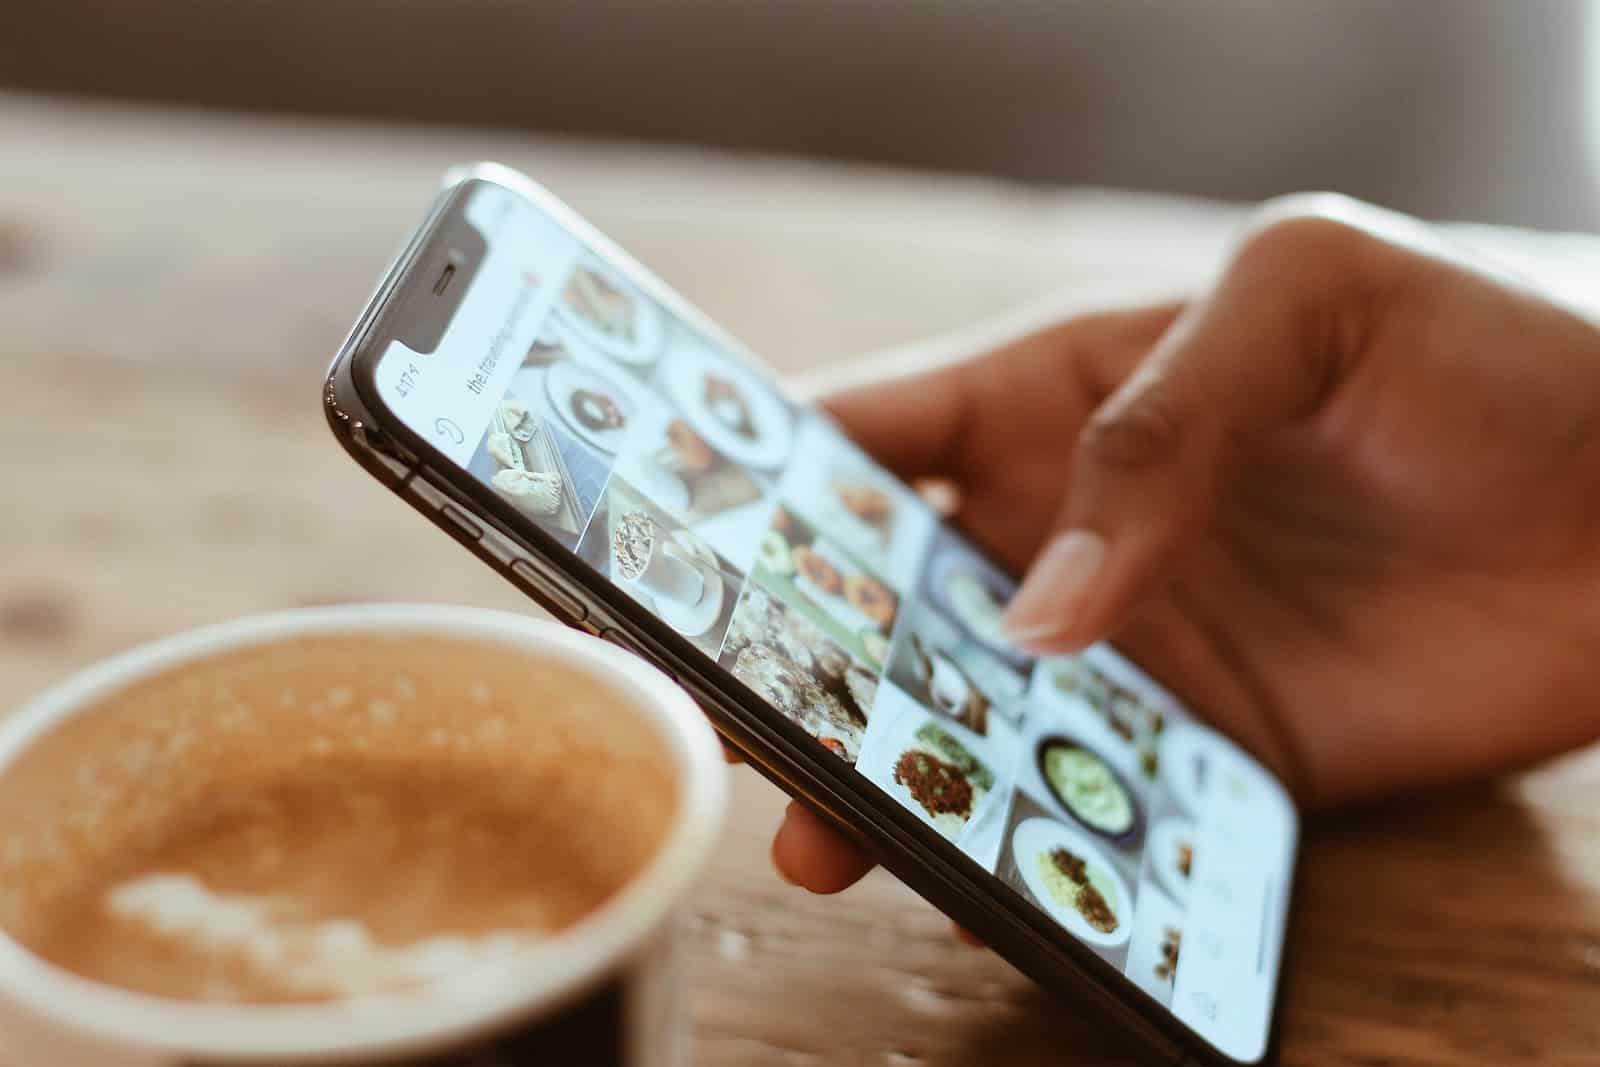 Someone holding a phone with images on the screen ready to upload to their social media account, adding to their digital footprint.